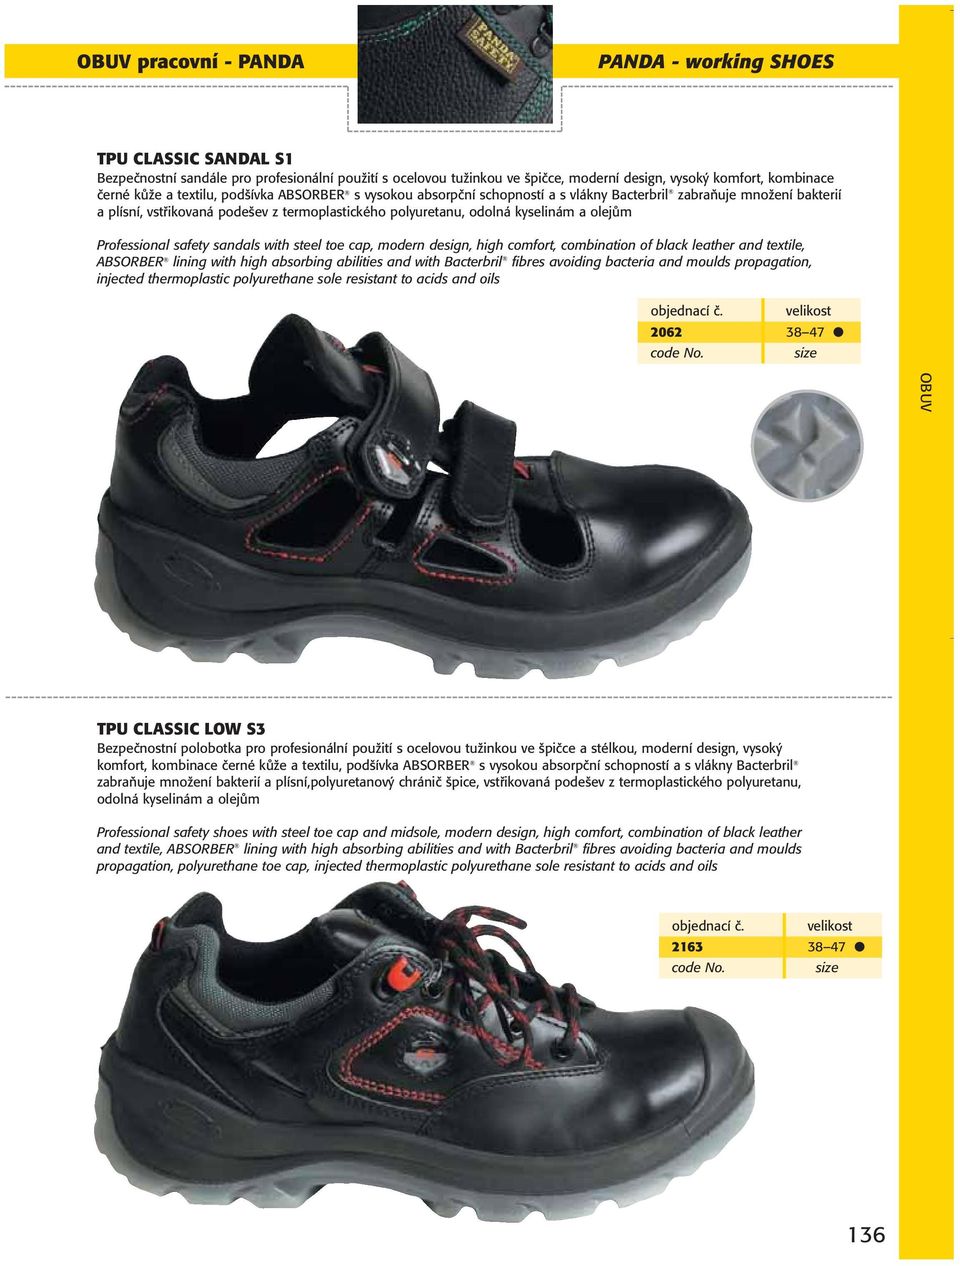 Professional safety sandals with steel toe cap, modern design, high comfort, combination of black leather and textile, ABSORBER lining with high absorbing abilities and with Bacterbril fibres